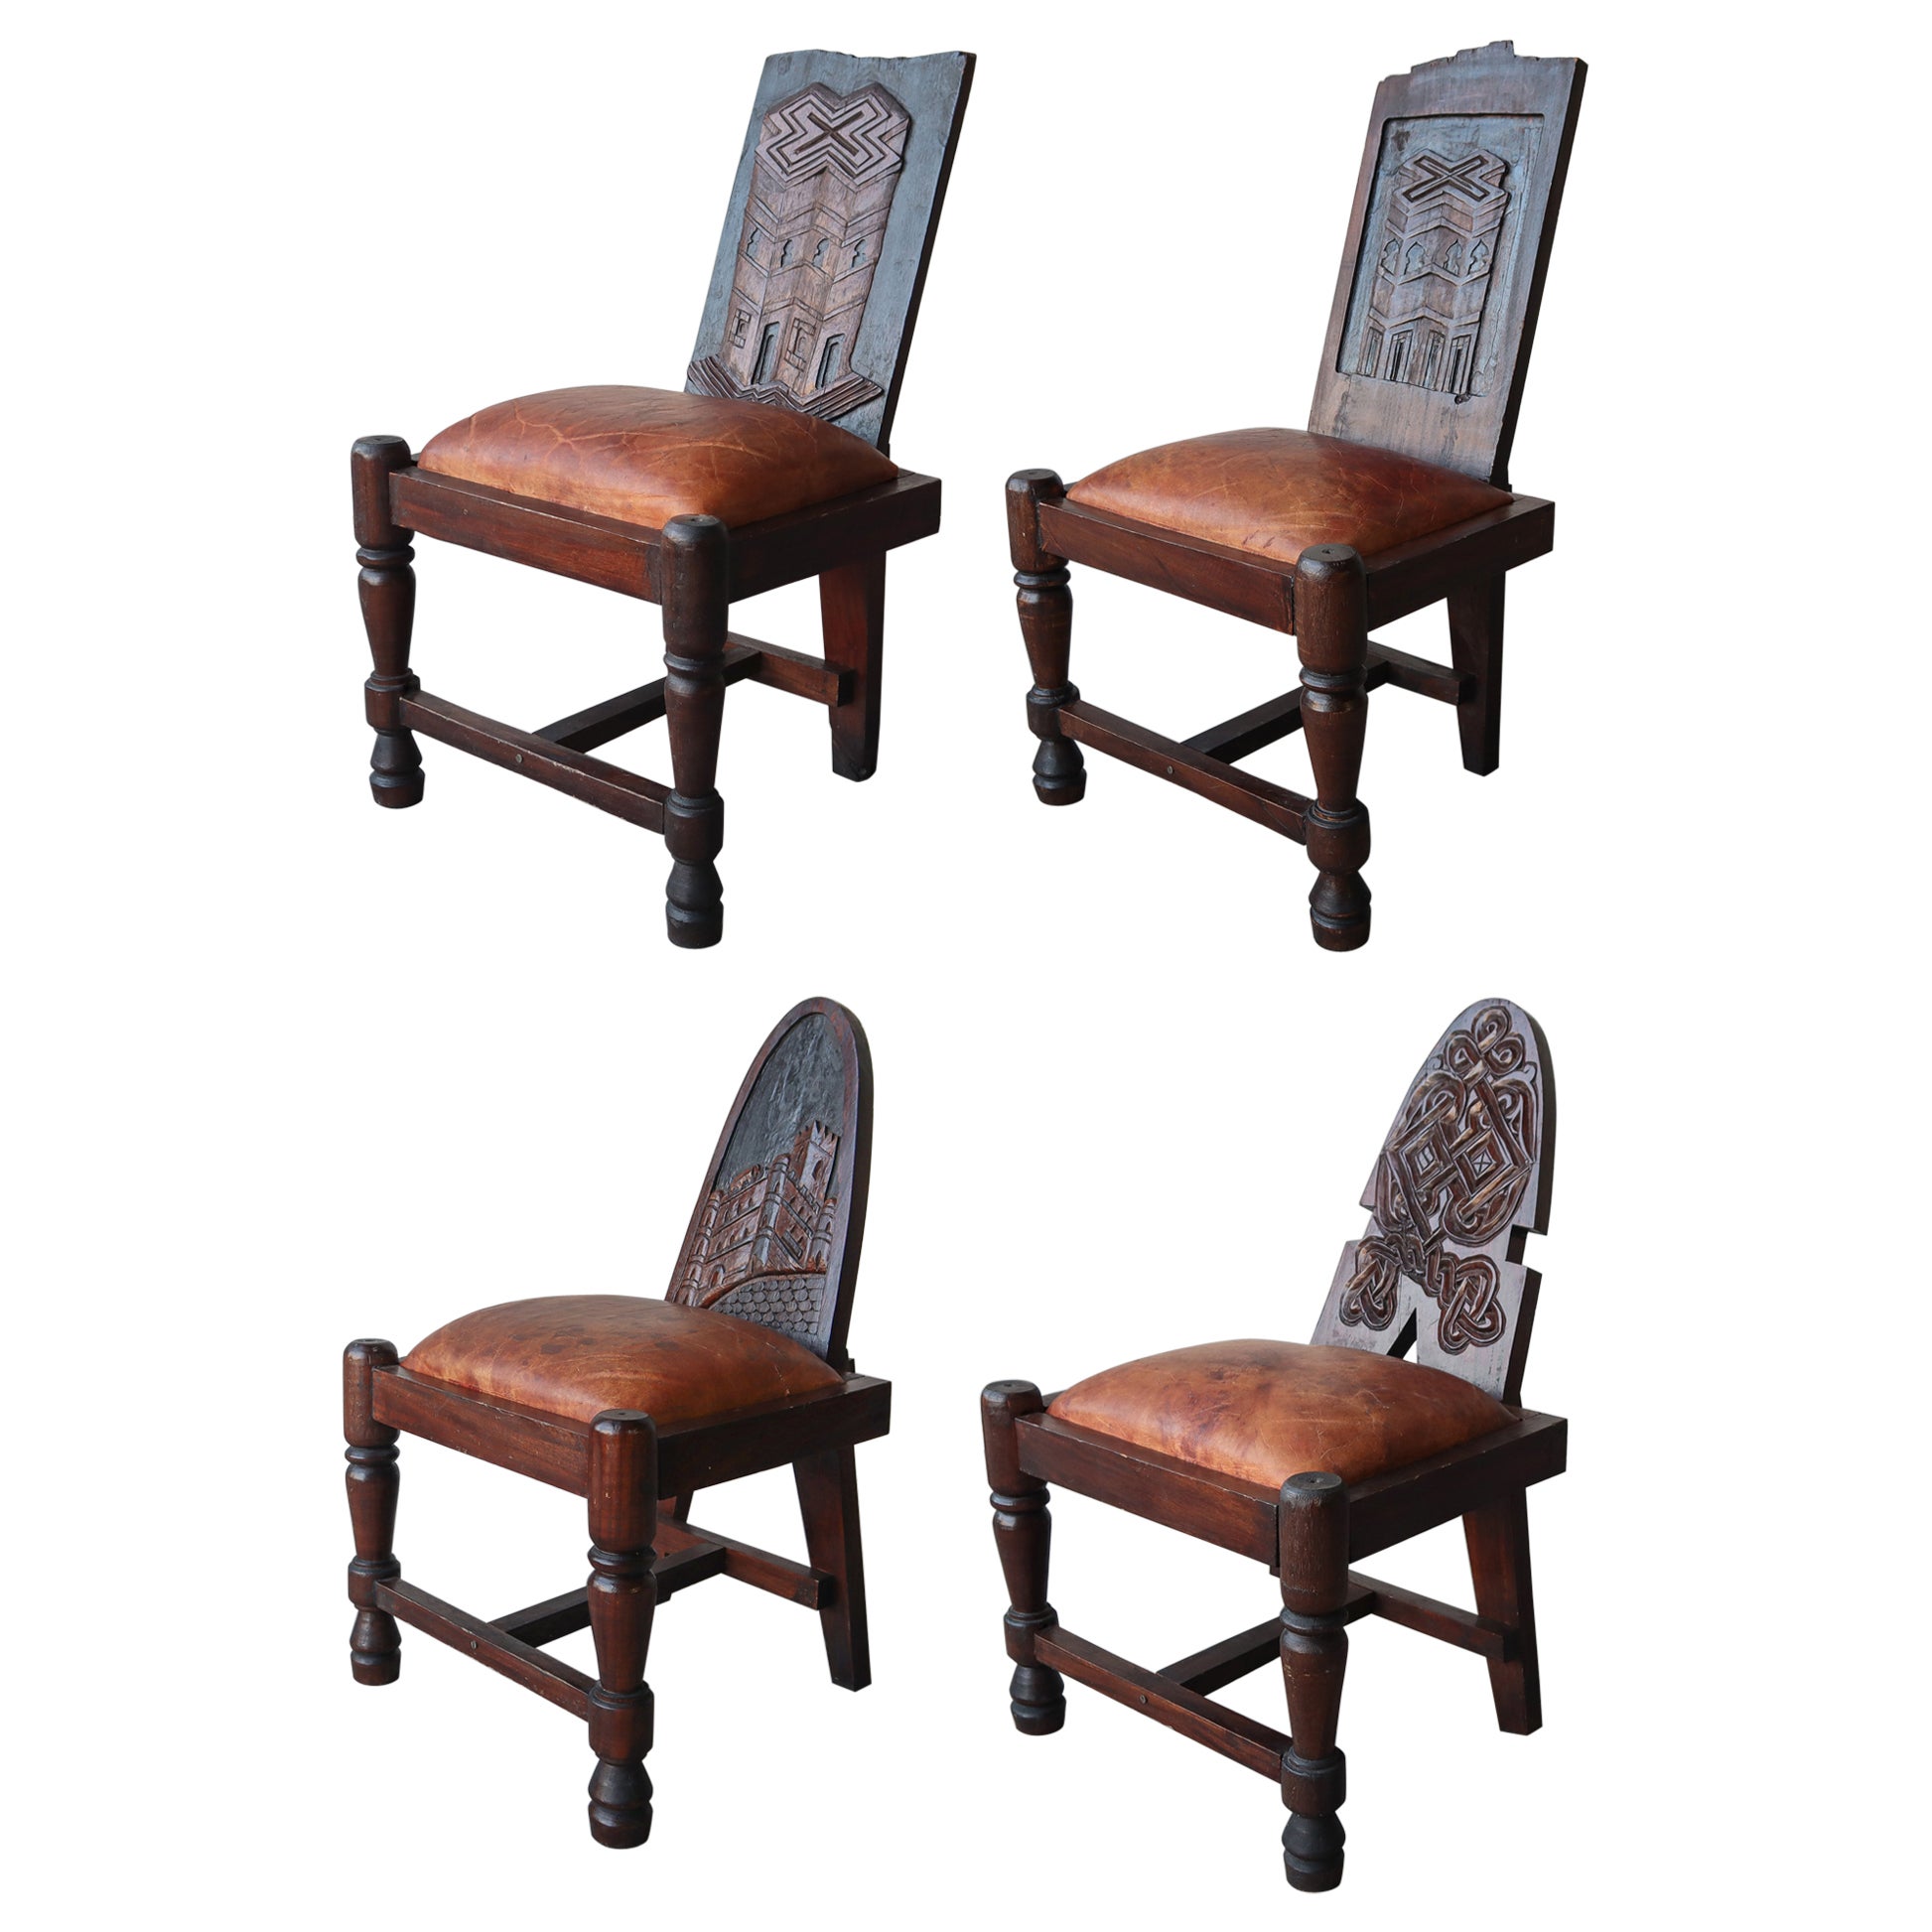 Primitive Hand Carved Wood and Leather Chairs